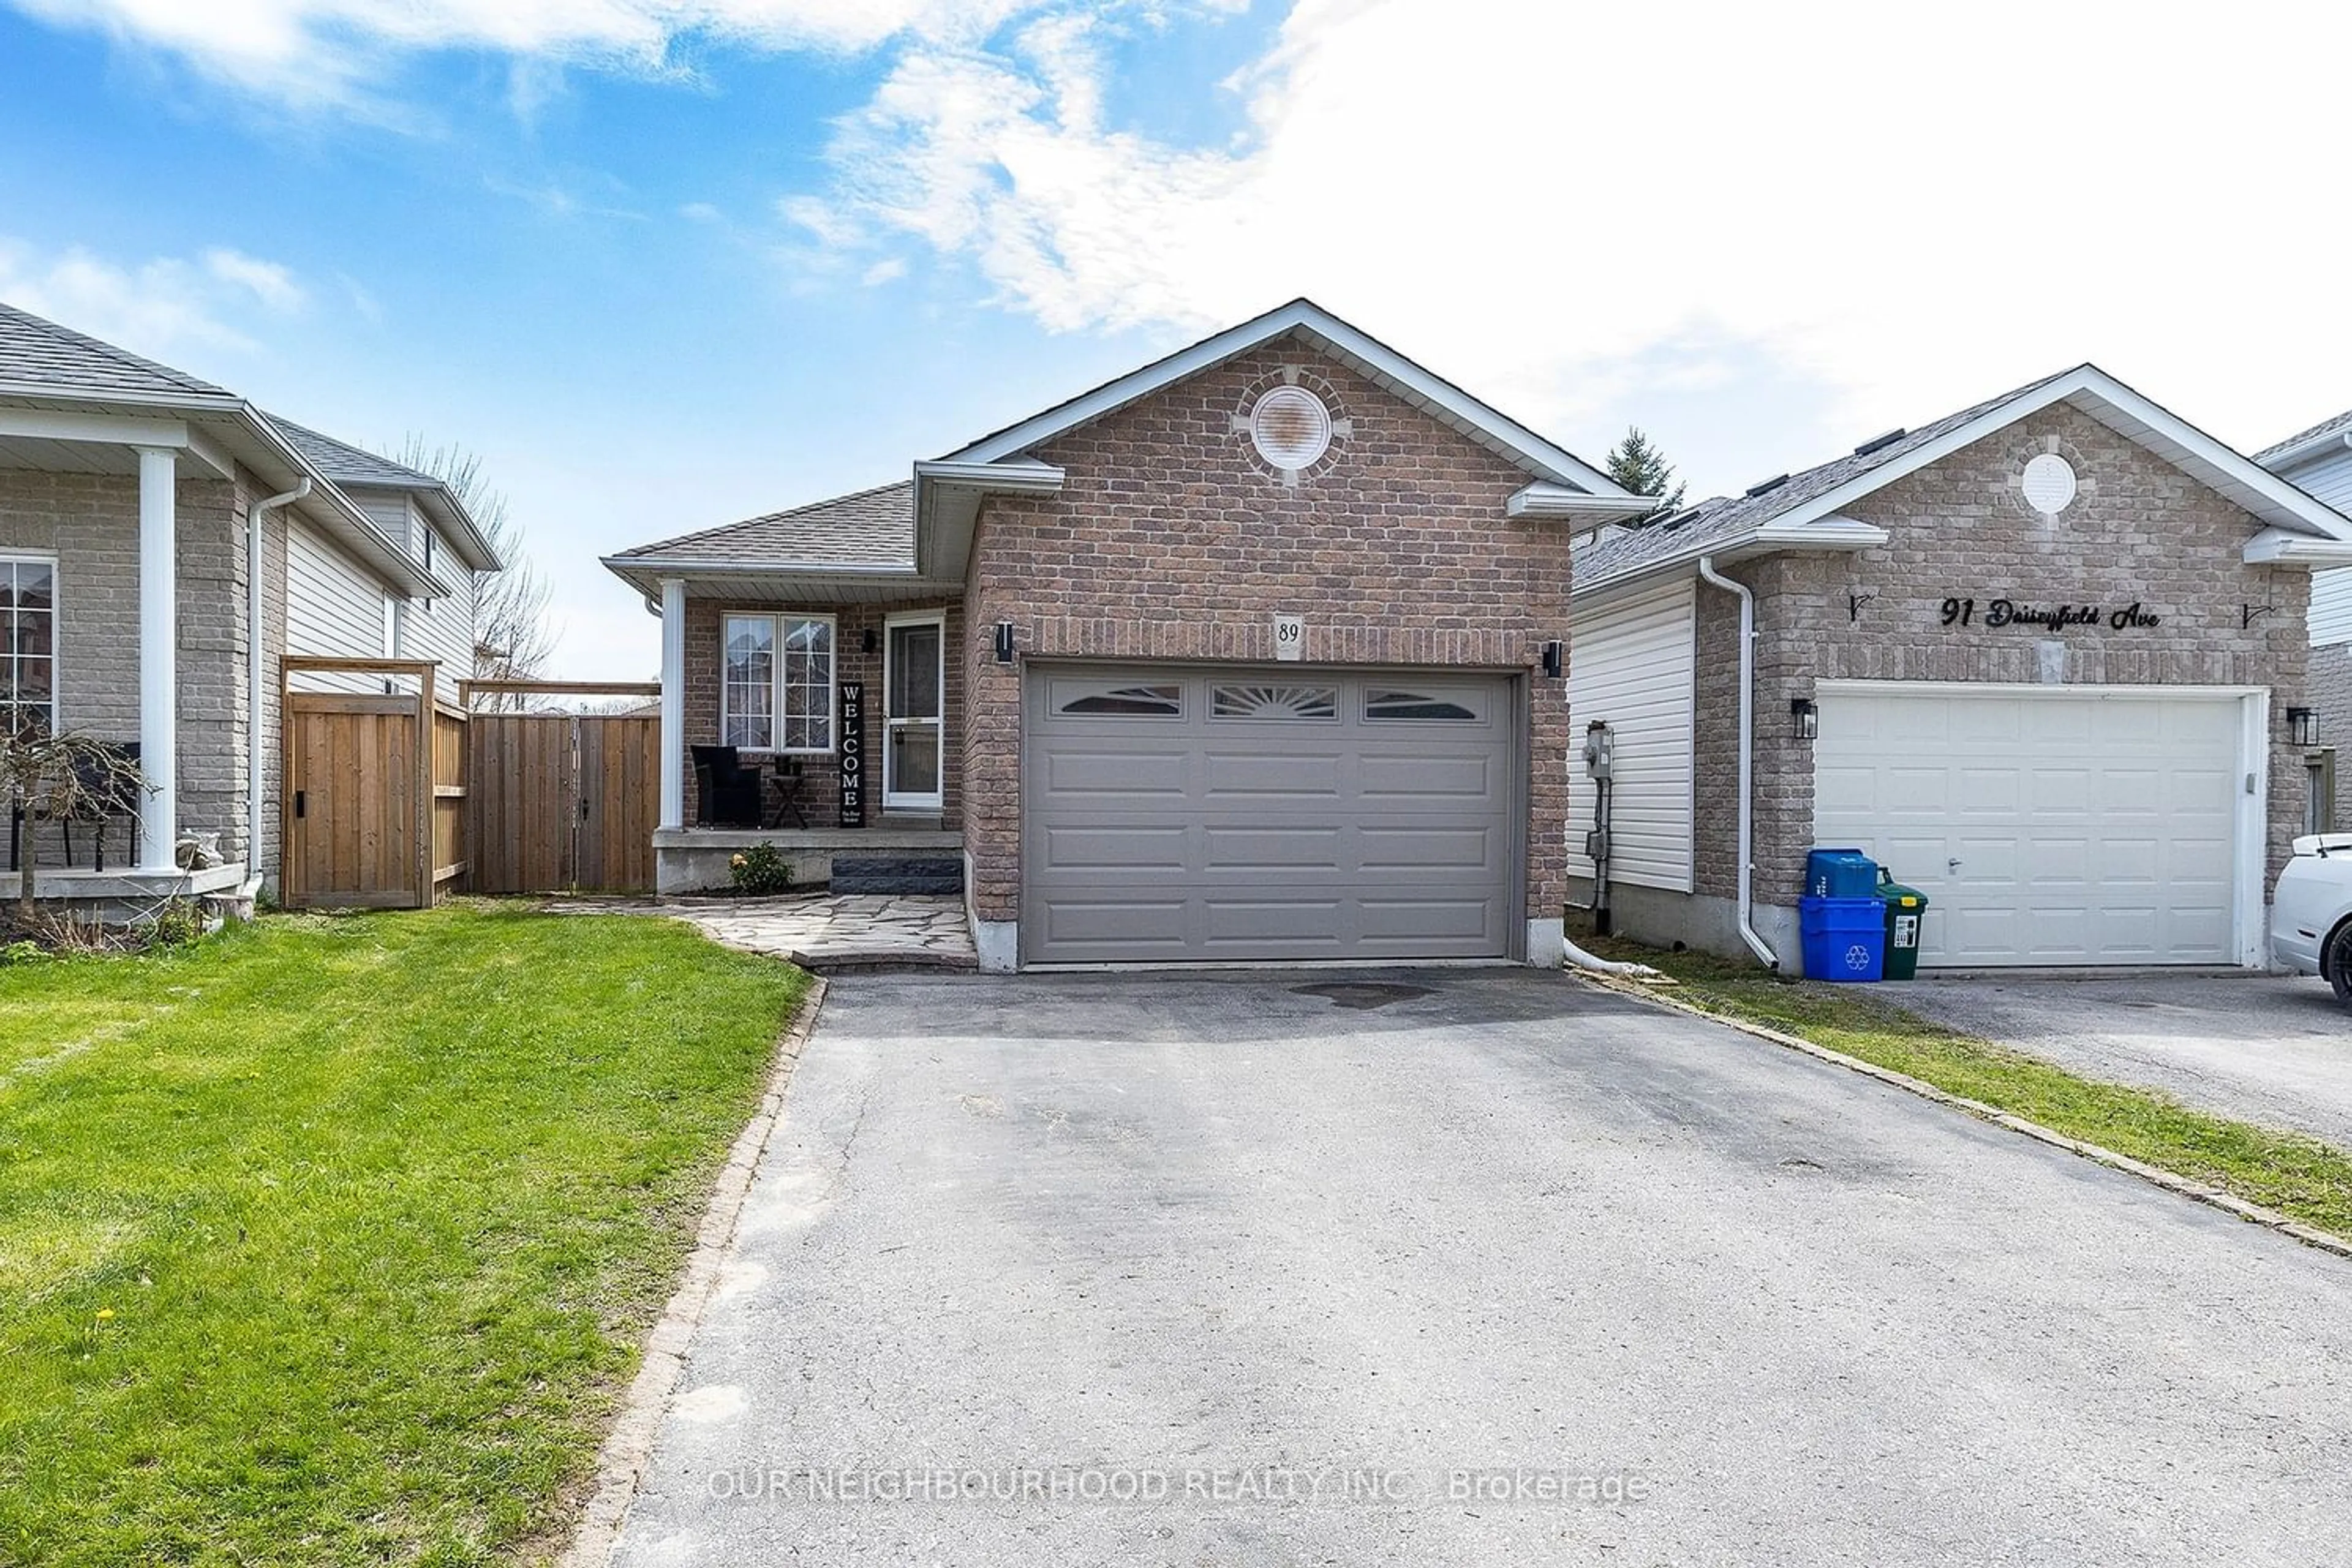 Frontside or backside of a home for 89 Daiseyfield Ave, Clarington Ontario L1E 3B3